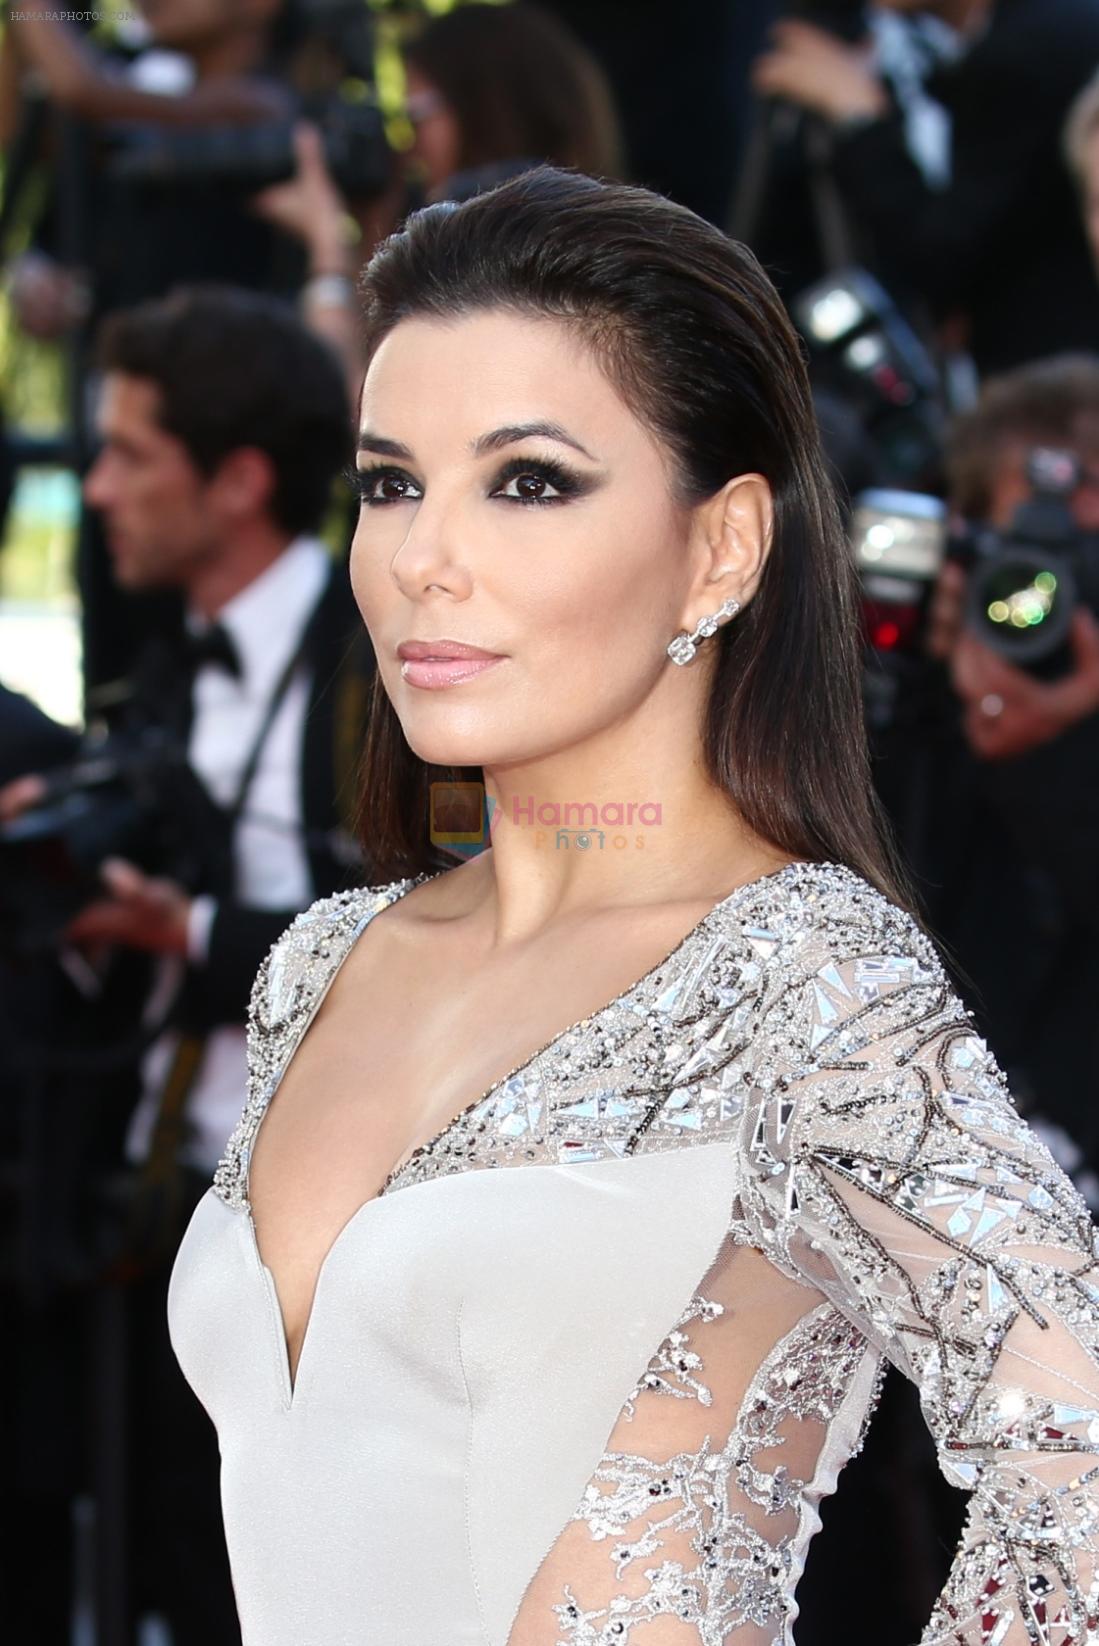 Eva Longoria on the Red Carpet  on Day 6 at Cannes